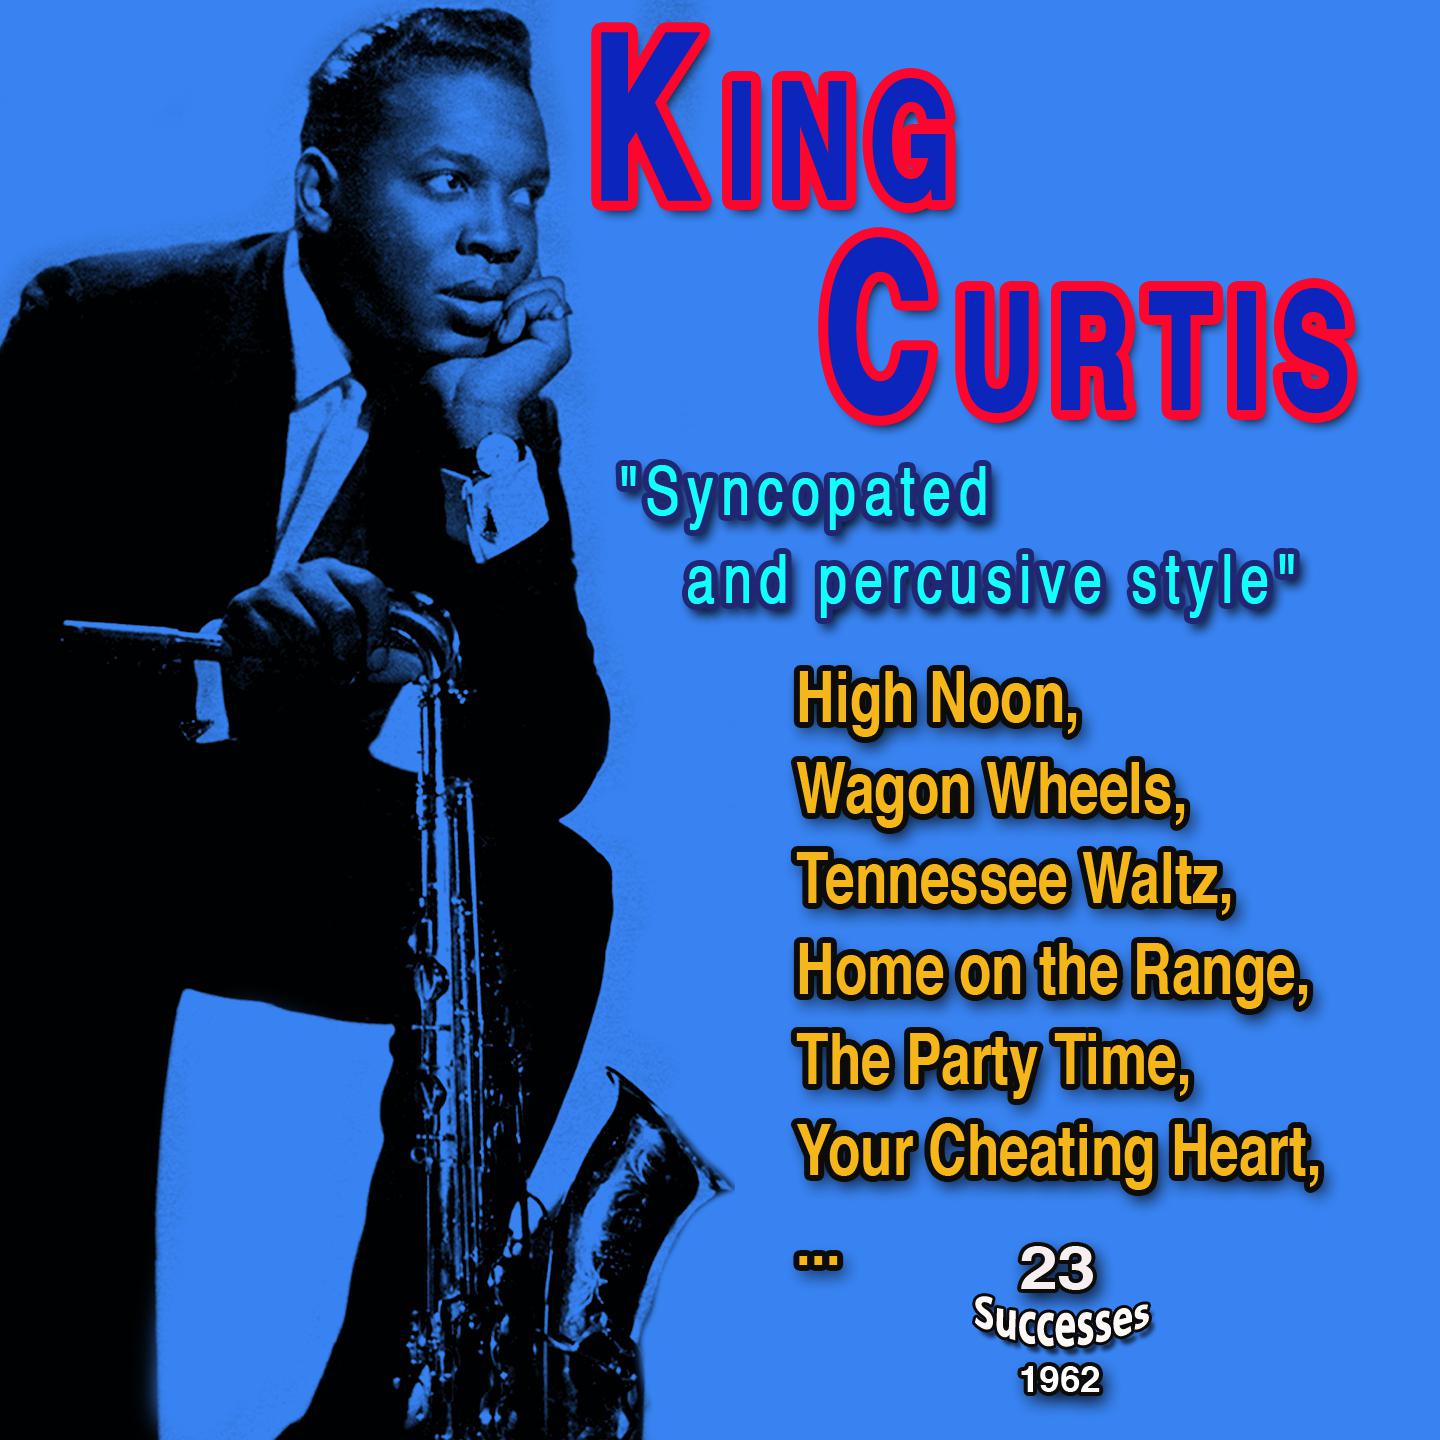 Постер альбома King Curtis "Syncopated and percusive style"